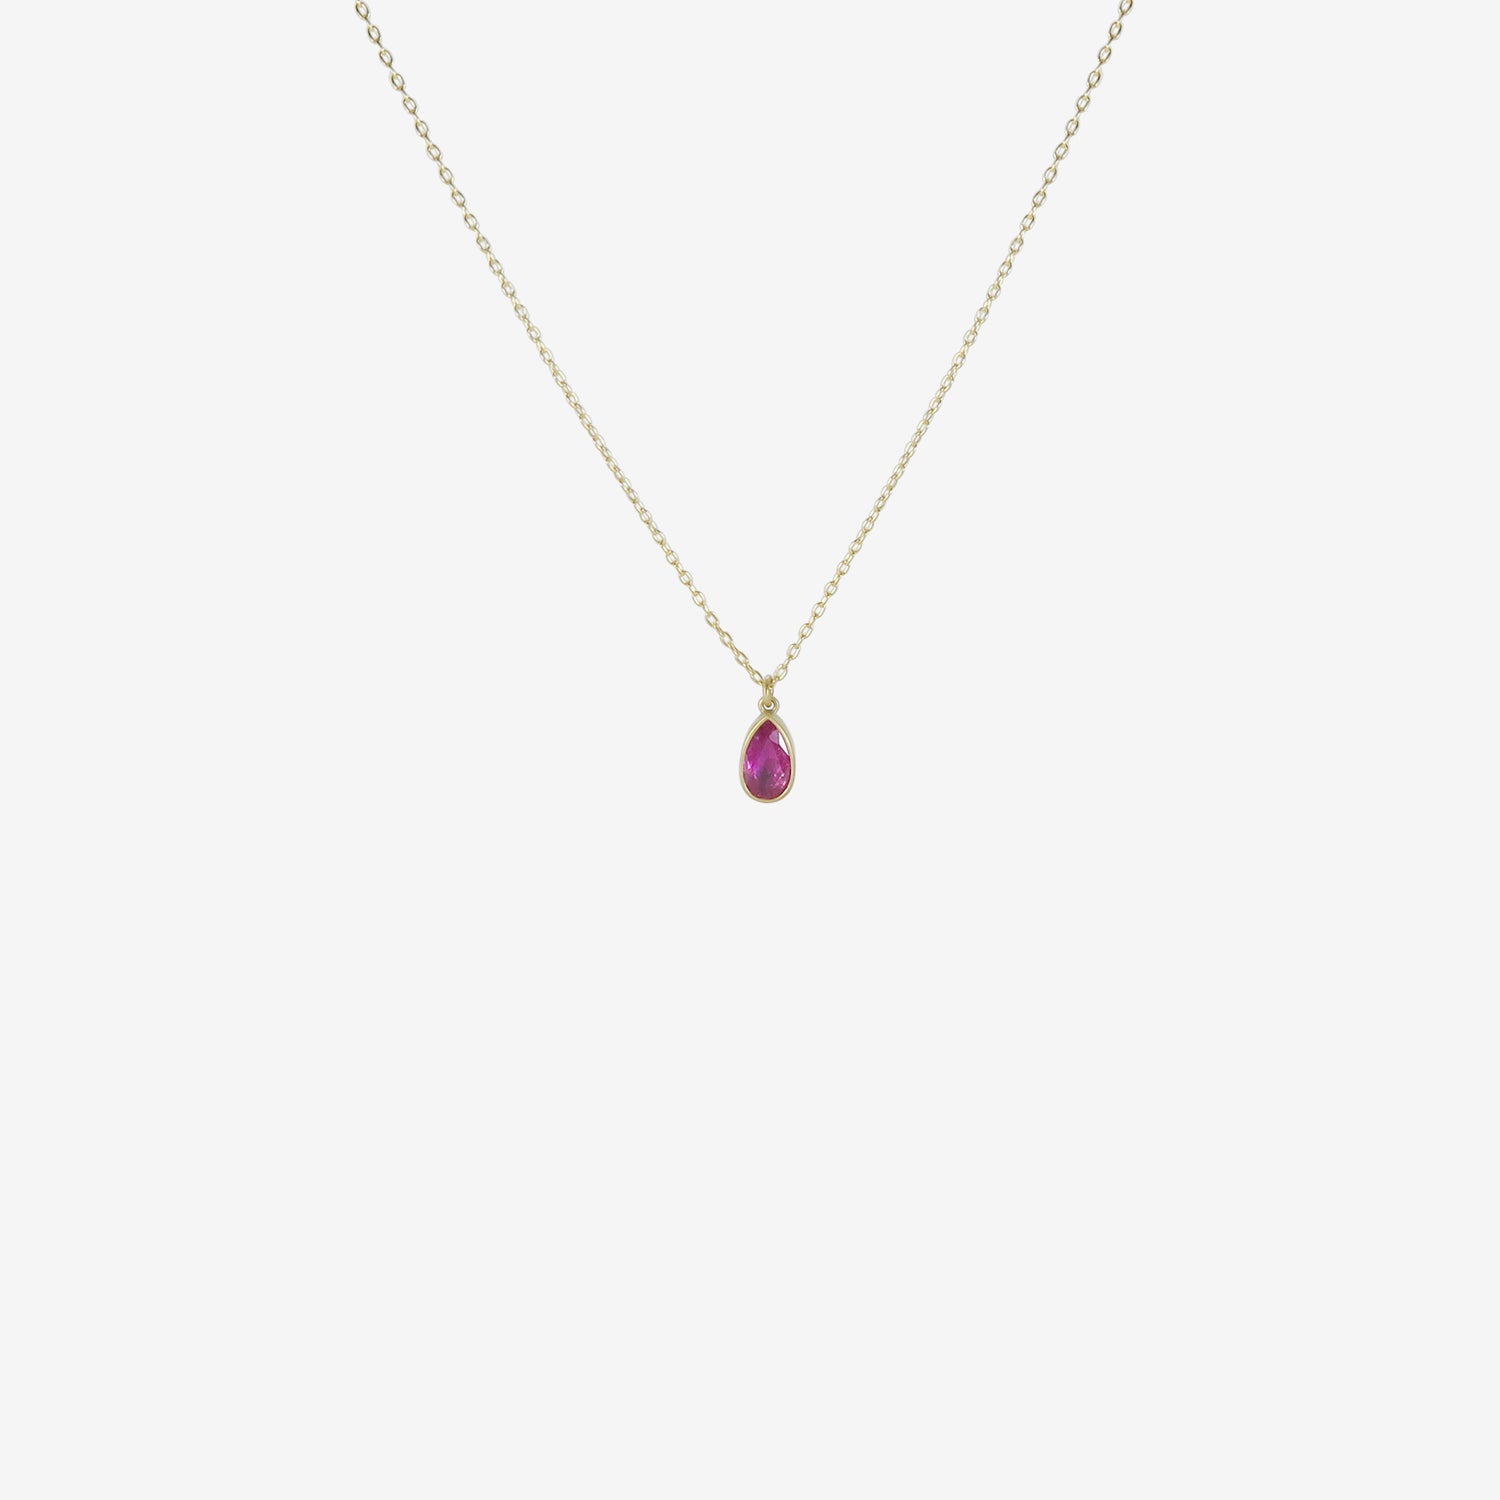 Oval Ruby Necklace - Kathryn Bentley